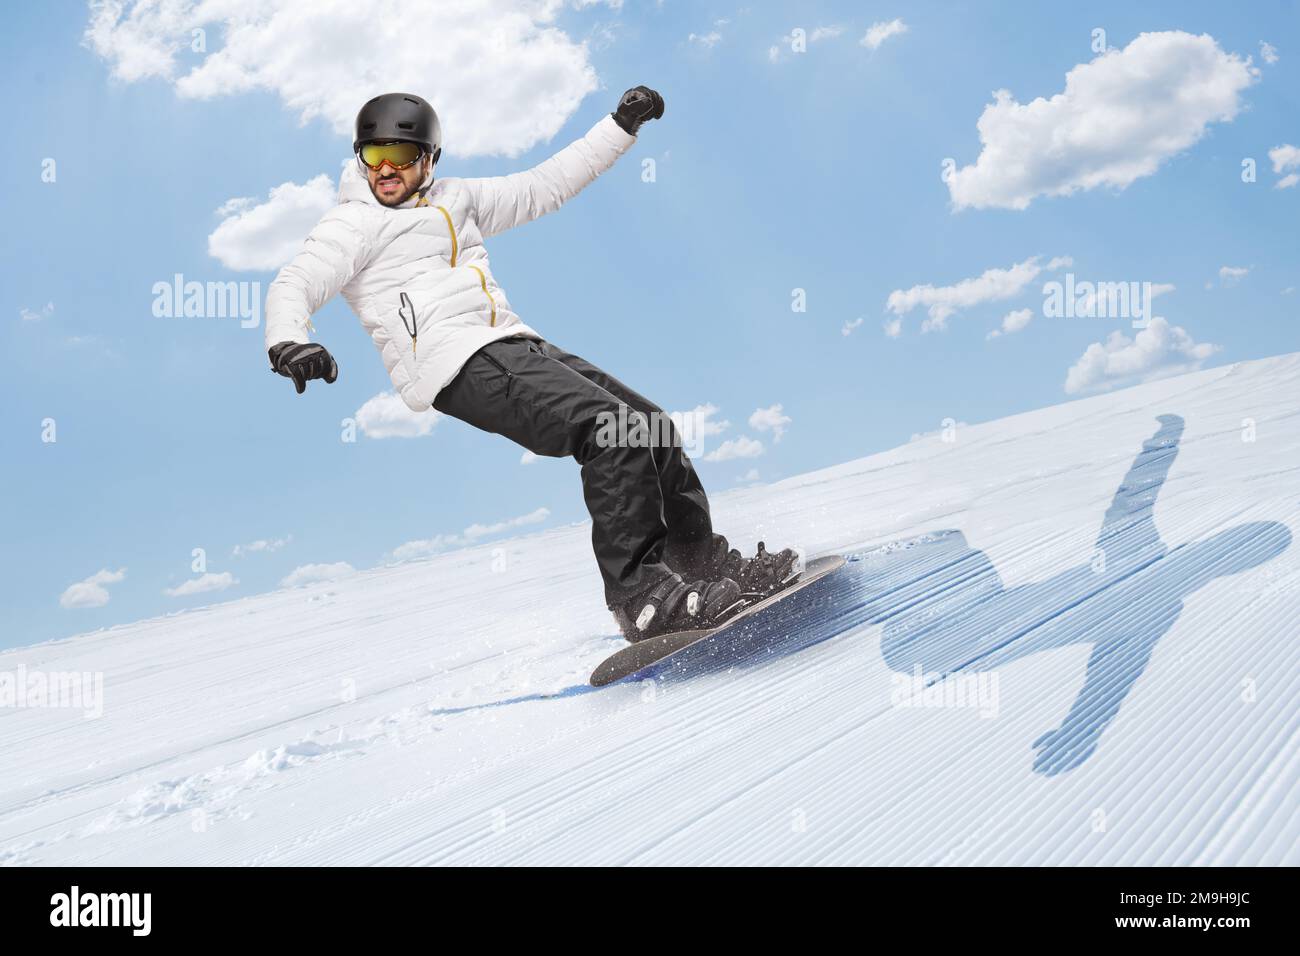 Full length shot of a man gliding with a snowboard downhill on a sunny day Stock Photo